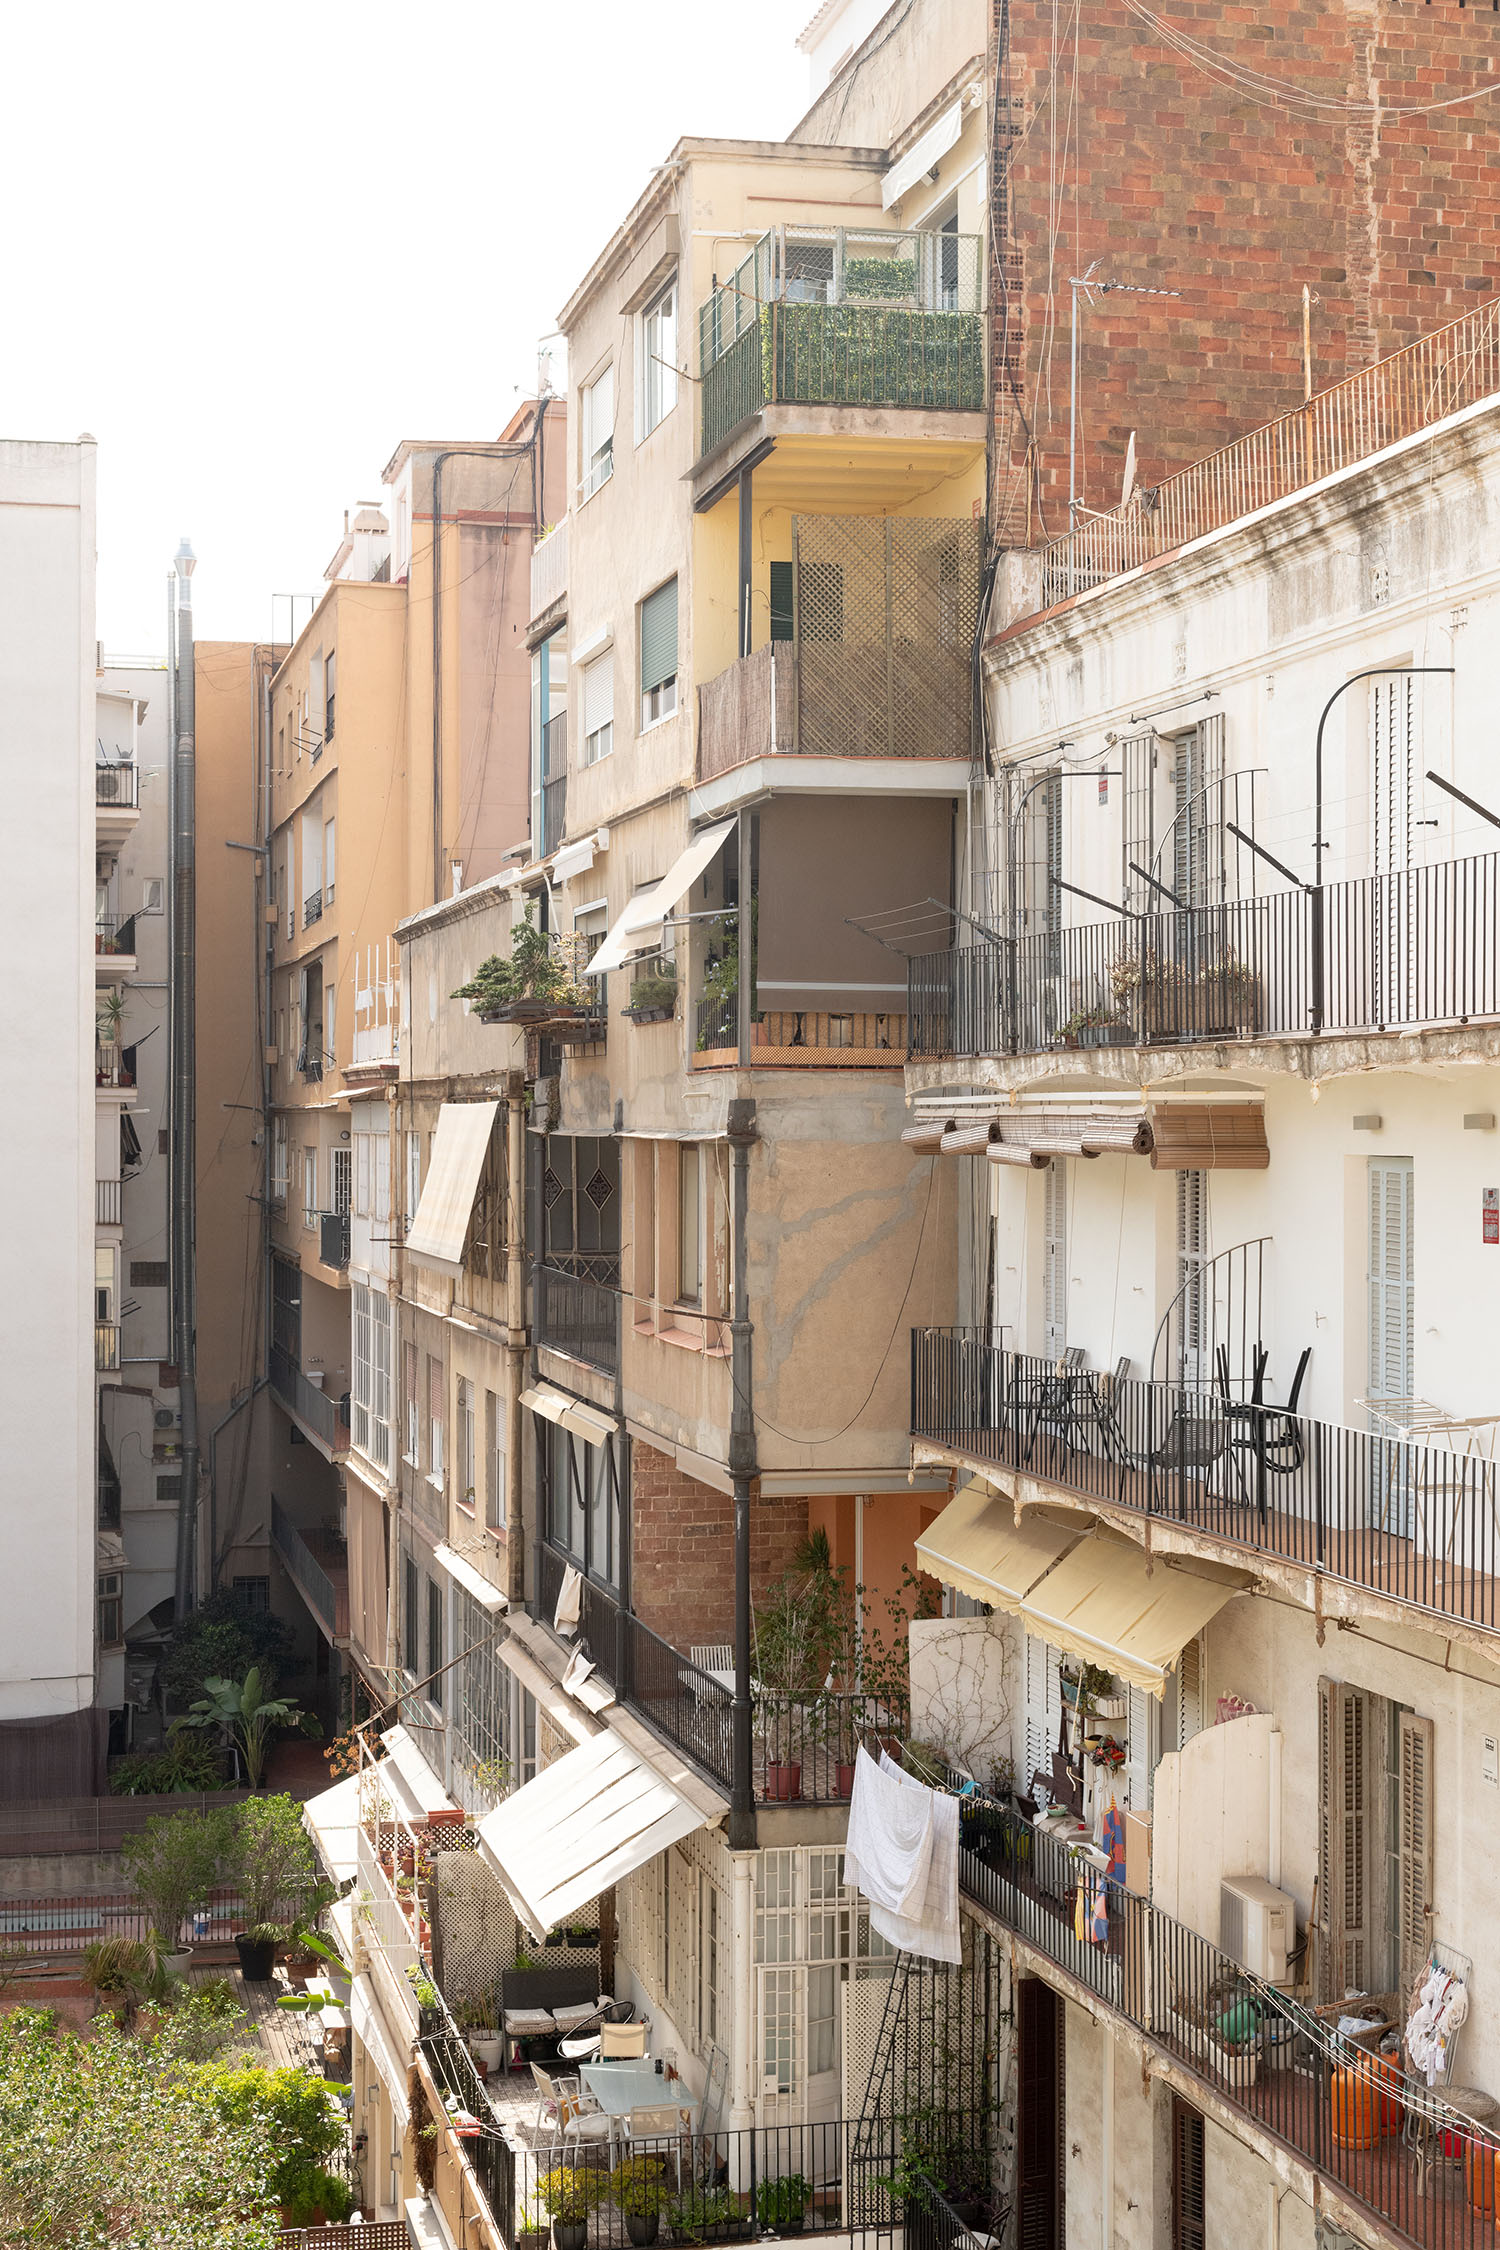 Coco & Voltaire - Interior courtyard with balconies in Barcelona